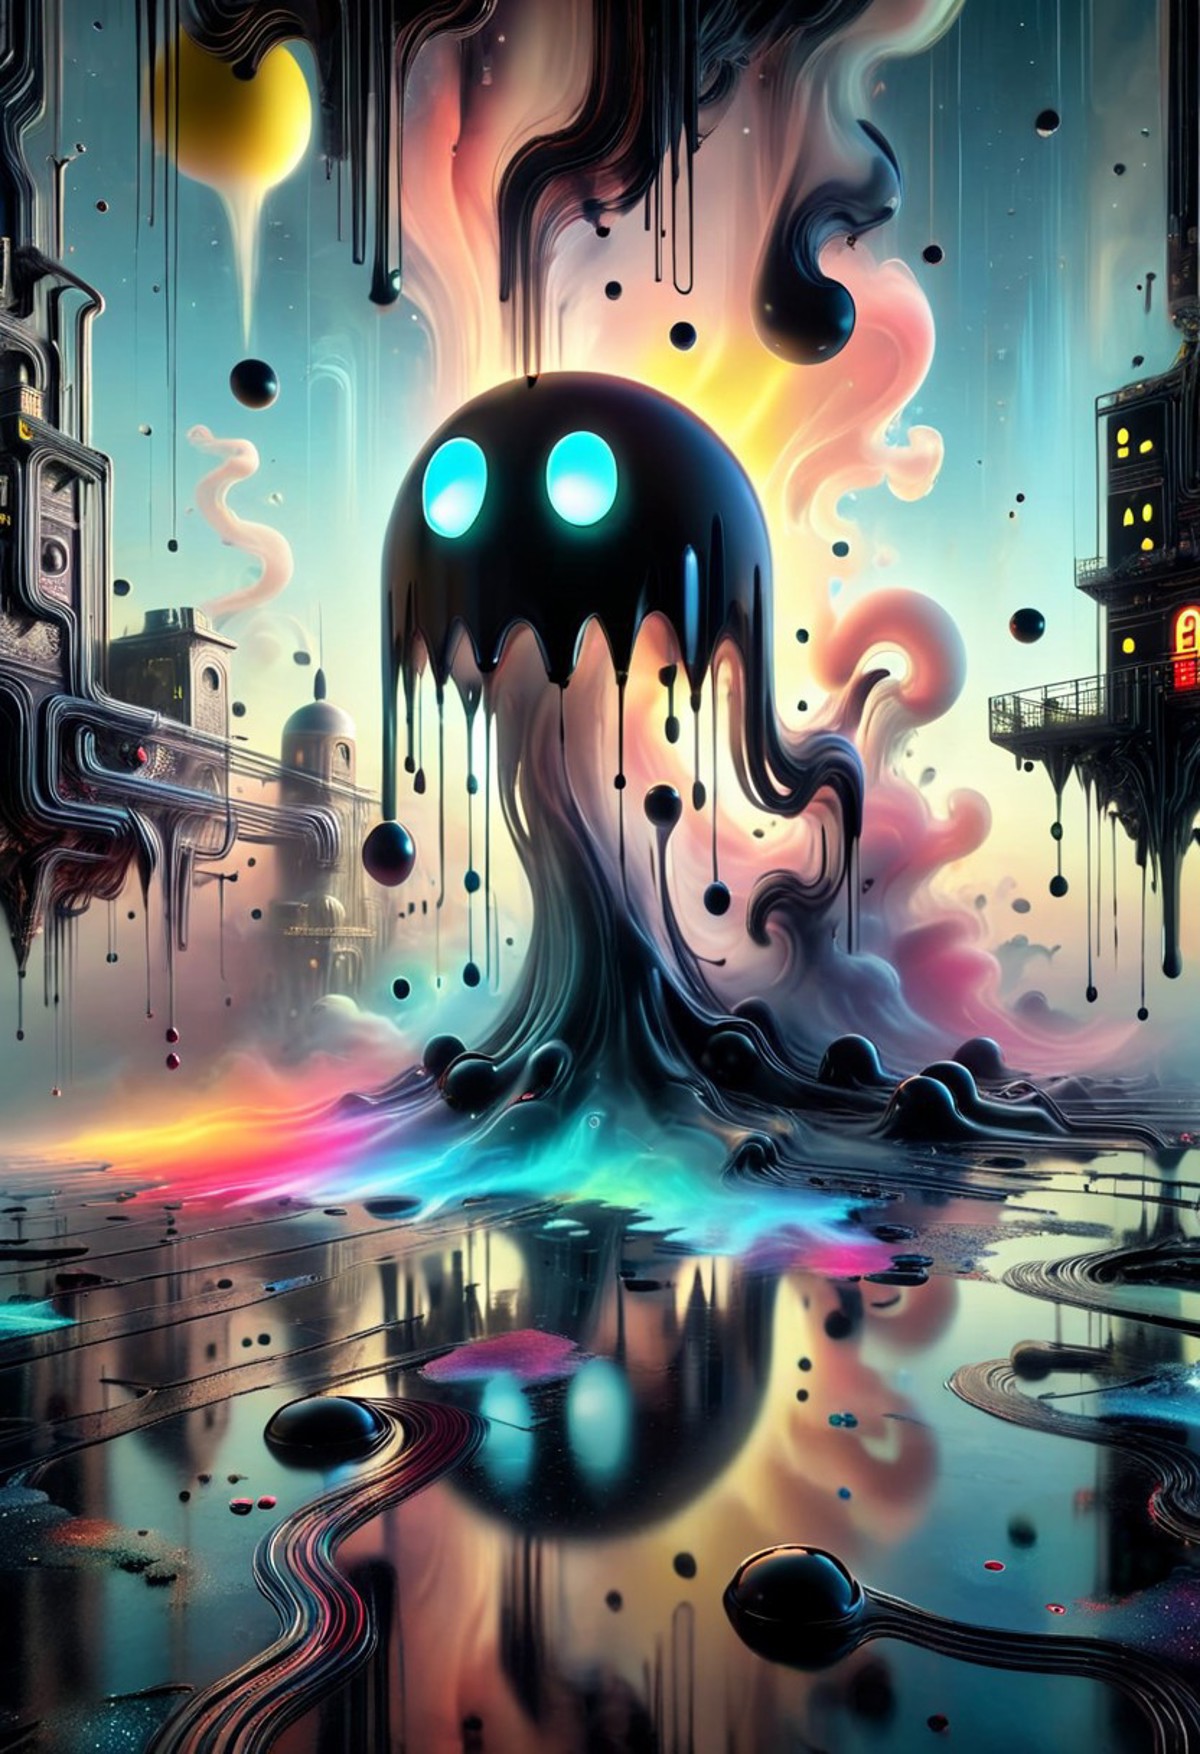 A large, dark figure resembling an ink blot with two glowing, round eyes seems to be melting or dripping, with smaller droplets suspended in midair around it. The surrounding incomplete architecture adds to the fantastical nature of this visual composition.